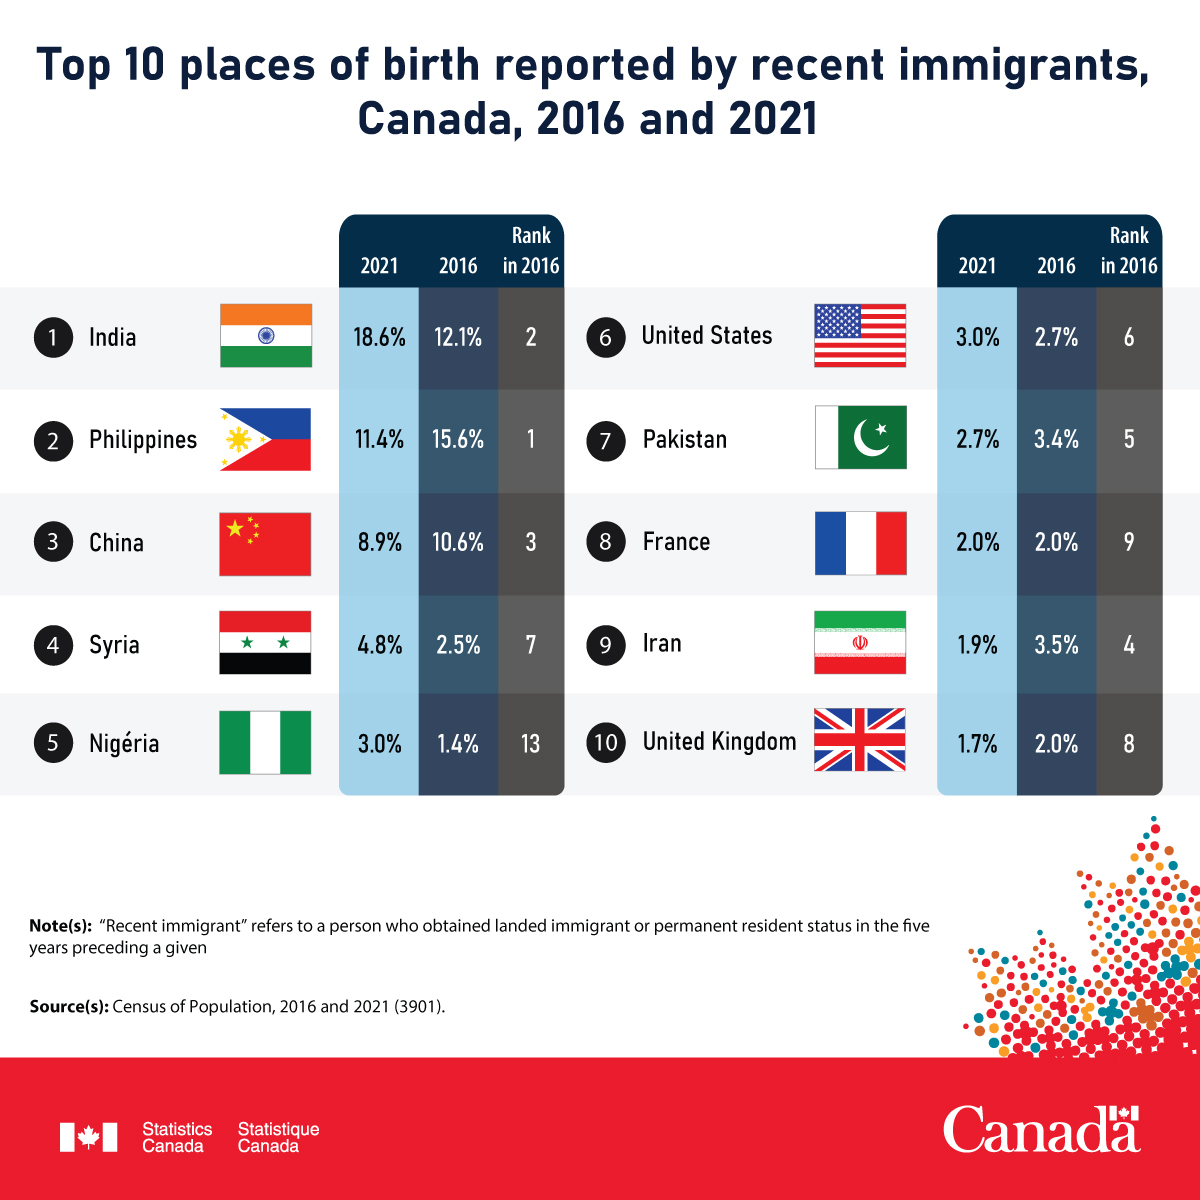 Top 10 places of birth reported by recent immigrants, Canada, 2016 and 2021